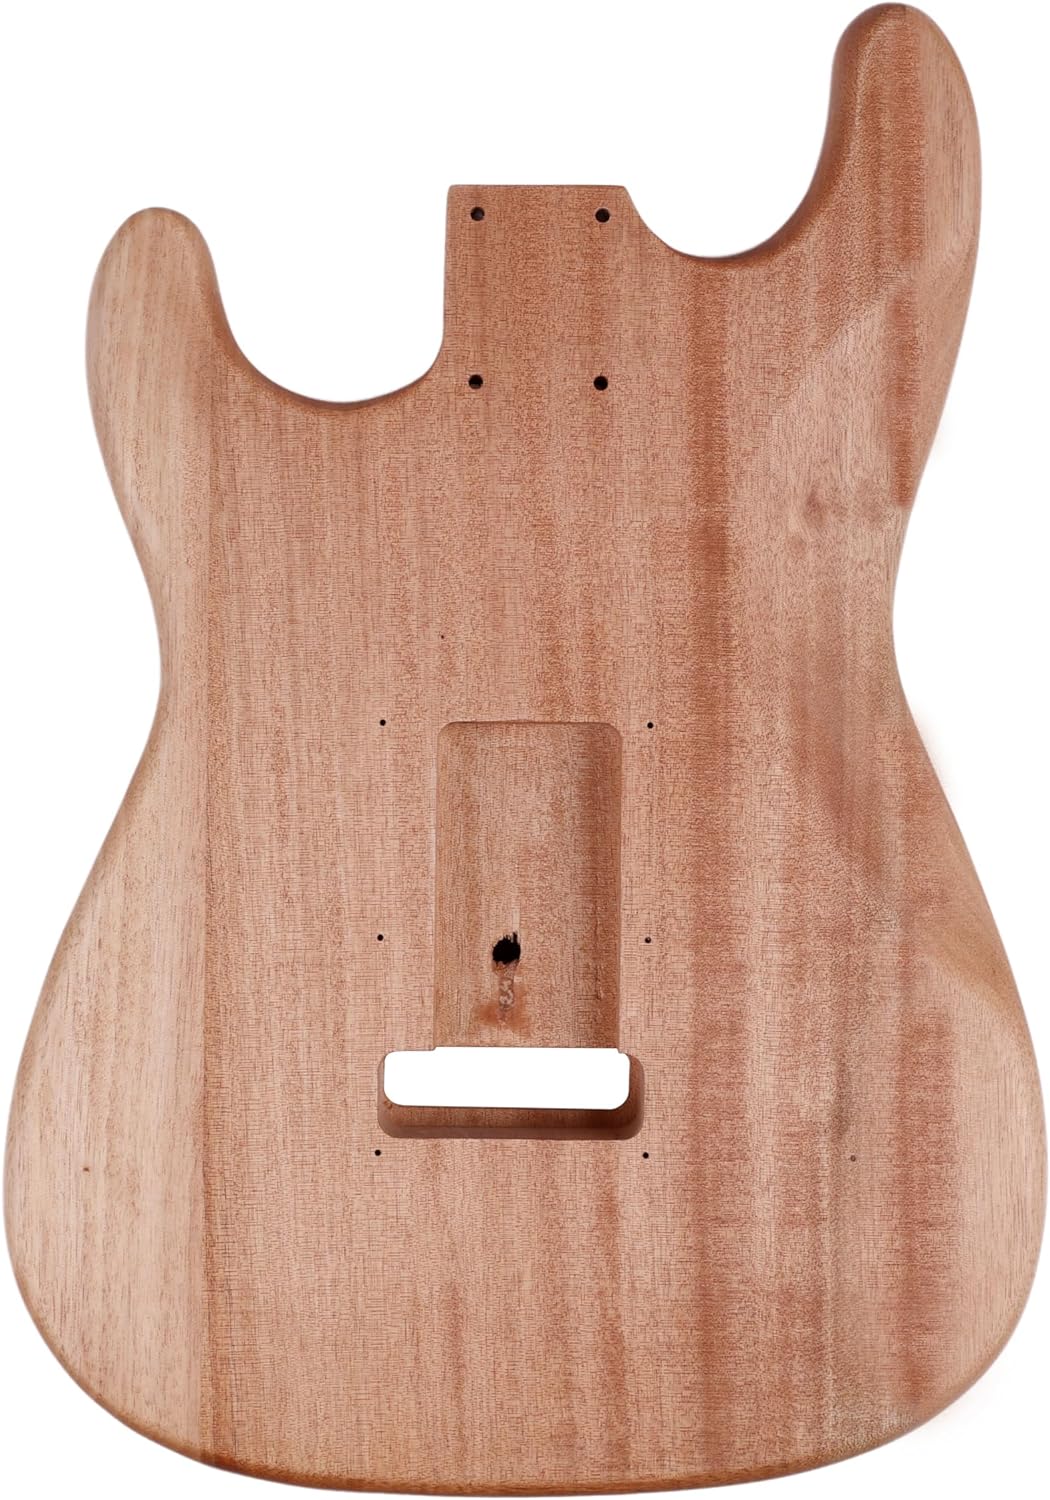 Leo Jaymz DIY ST Style Electric Guitar Kits with Mahogany Body and Maple Neck - Rosewood Fingerboard and All Components Included - image 2 of 6